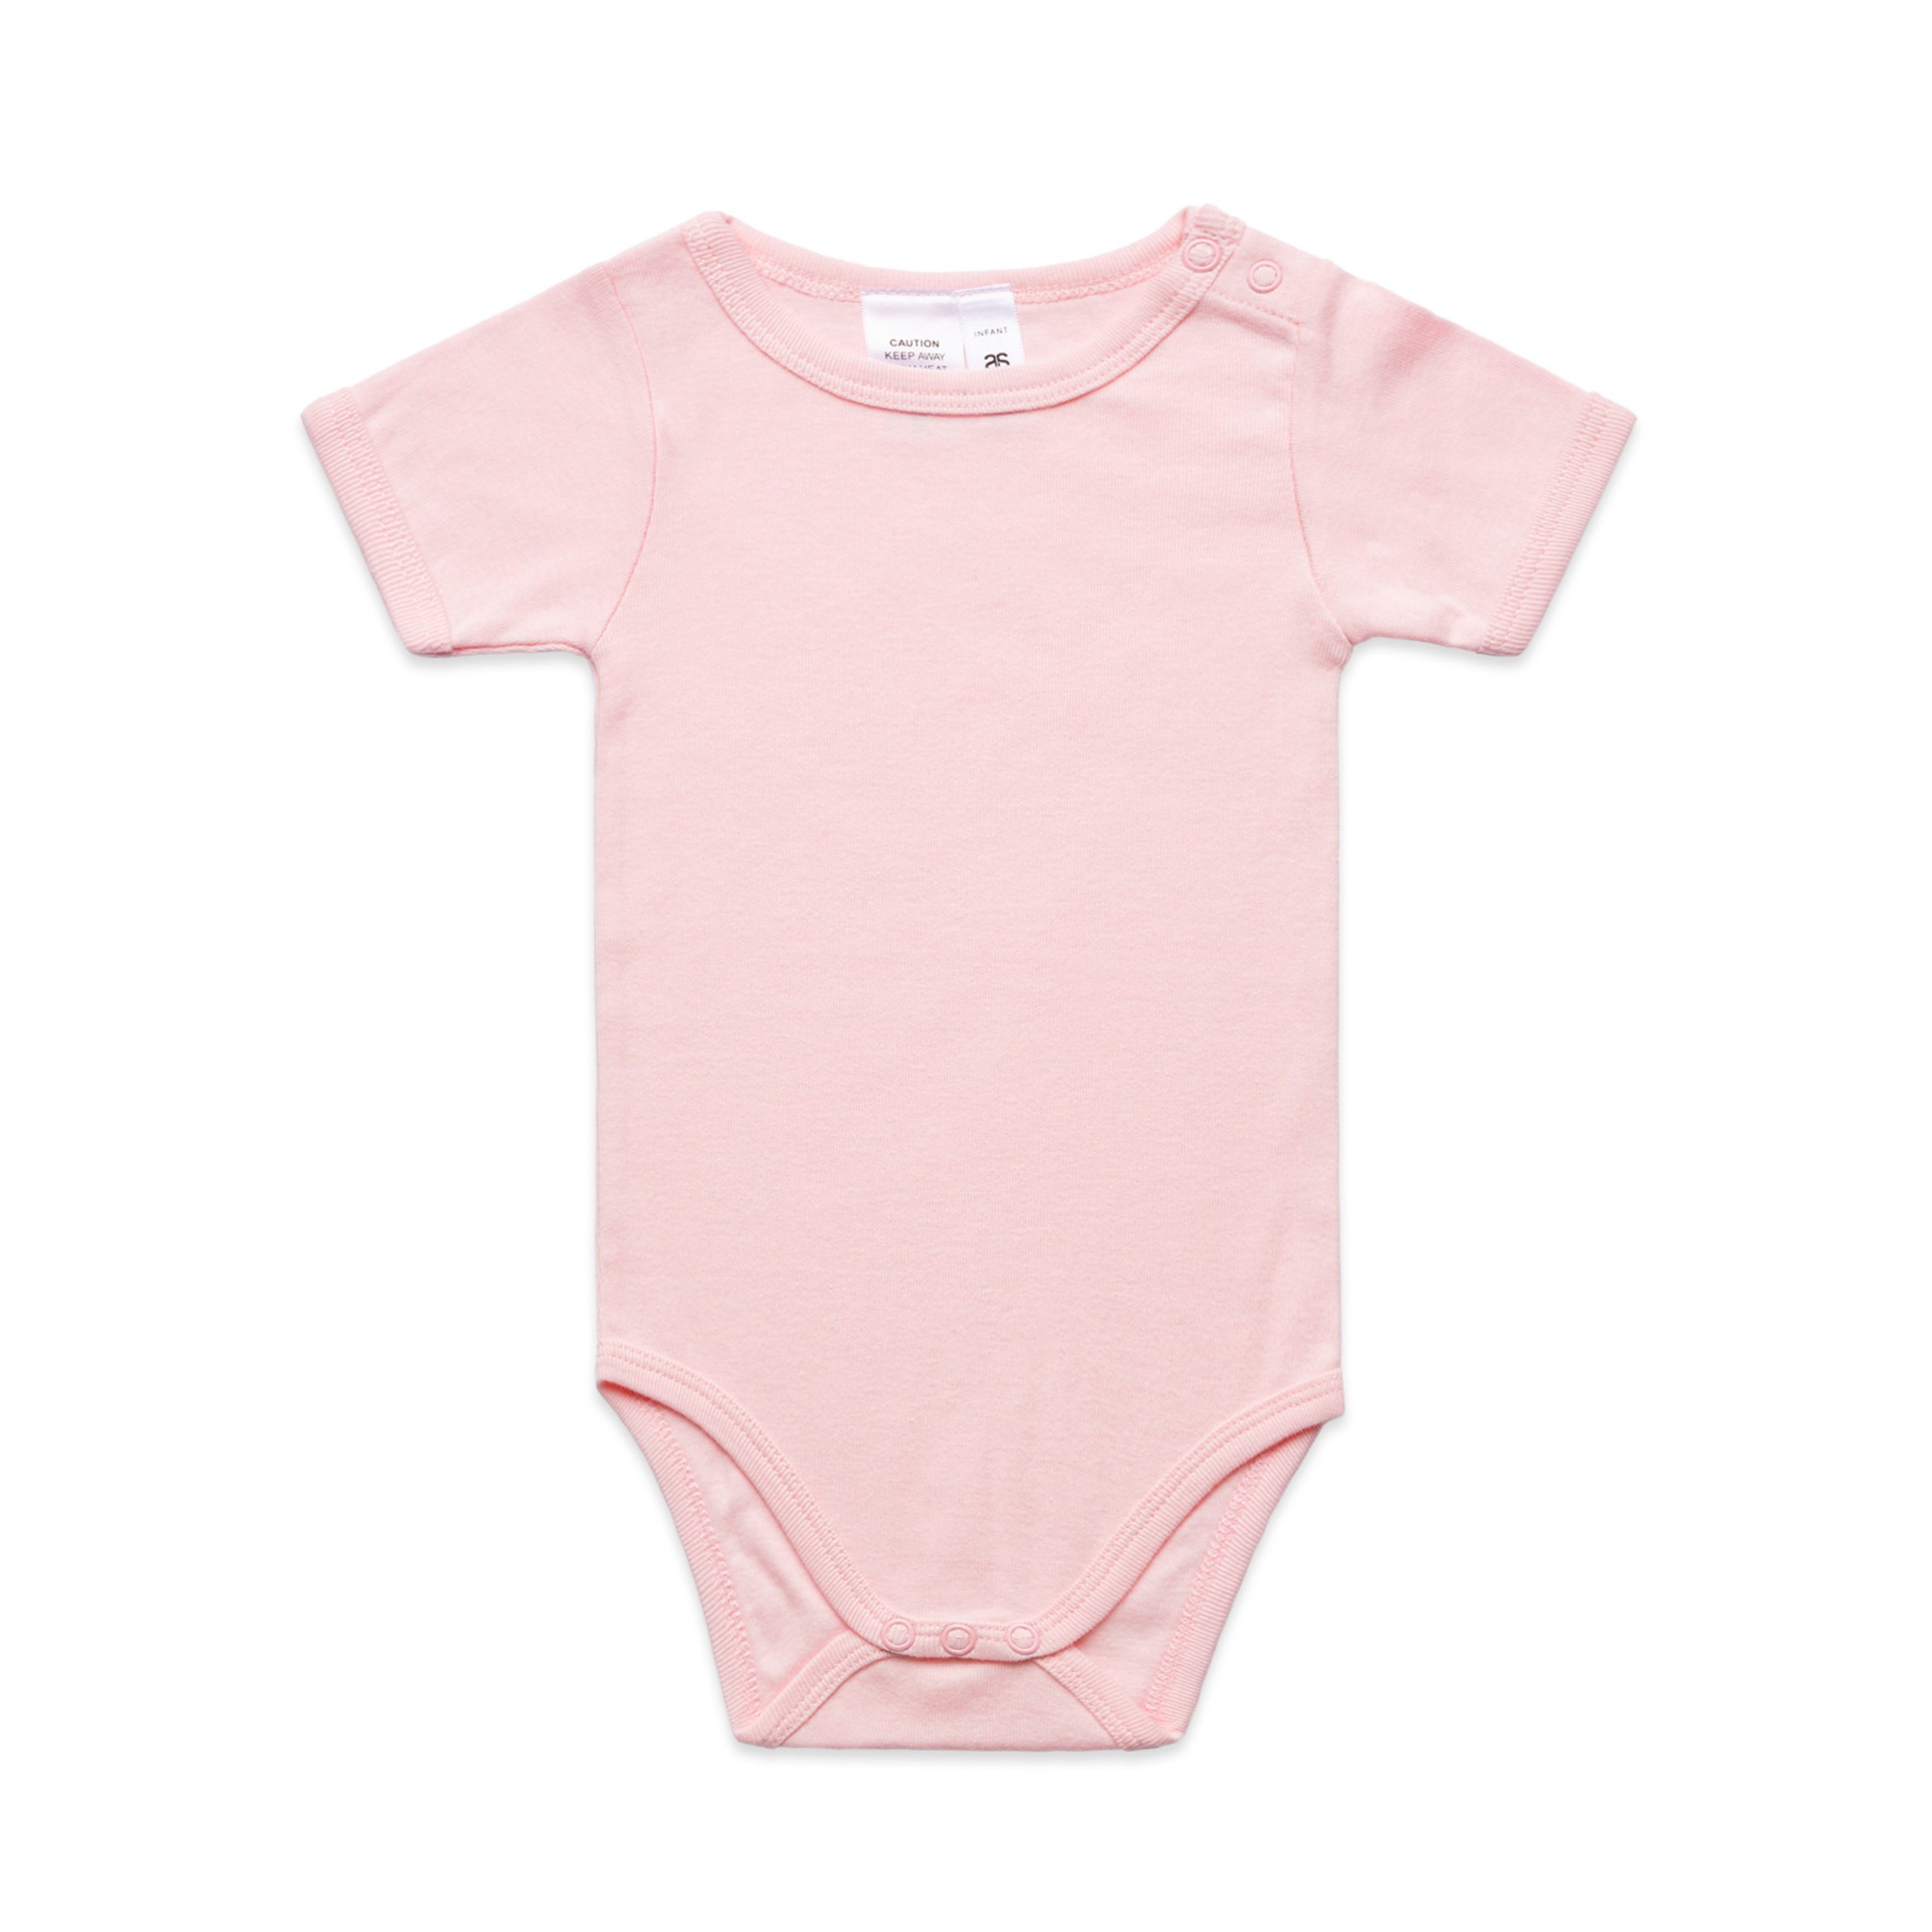 3003_AS_Infant-Mini-Me-One-Piece_Pink-scaled